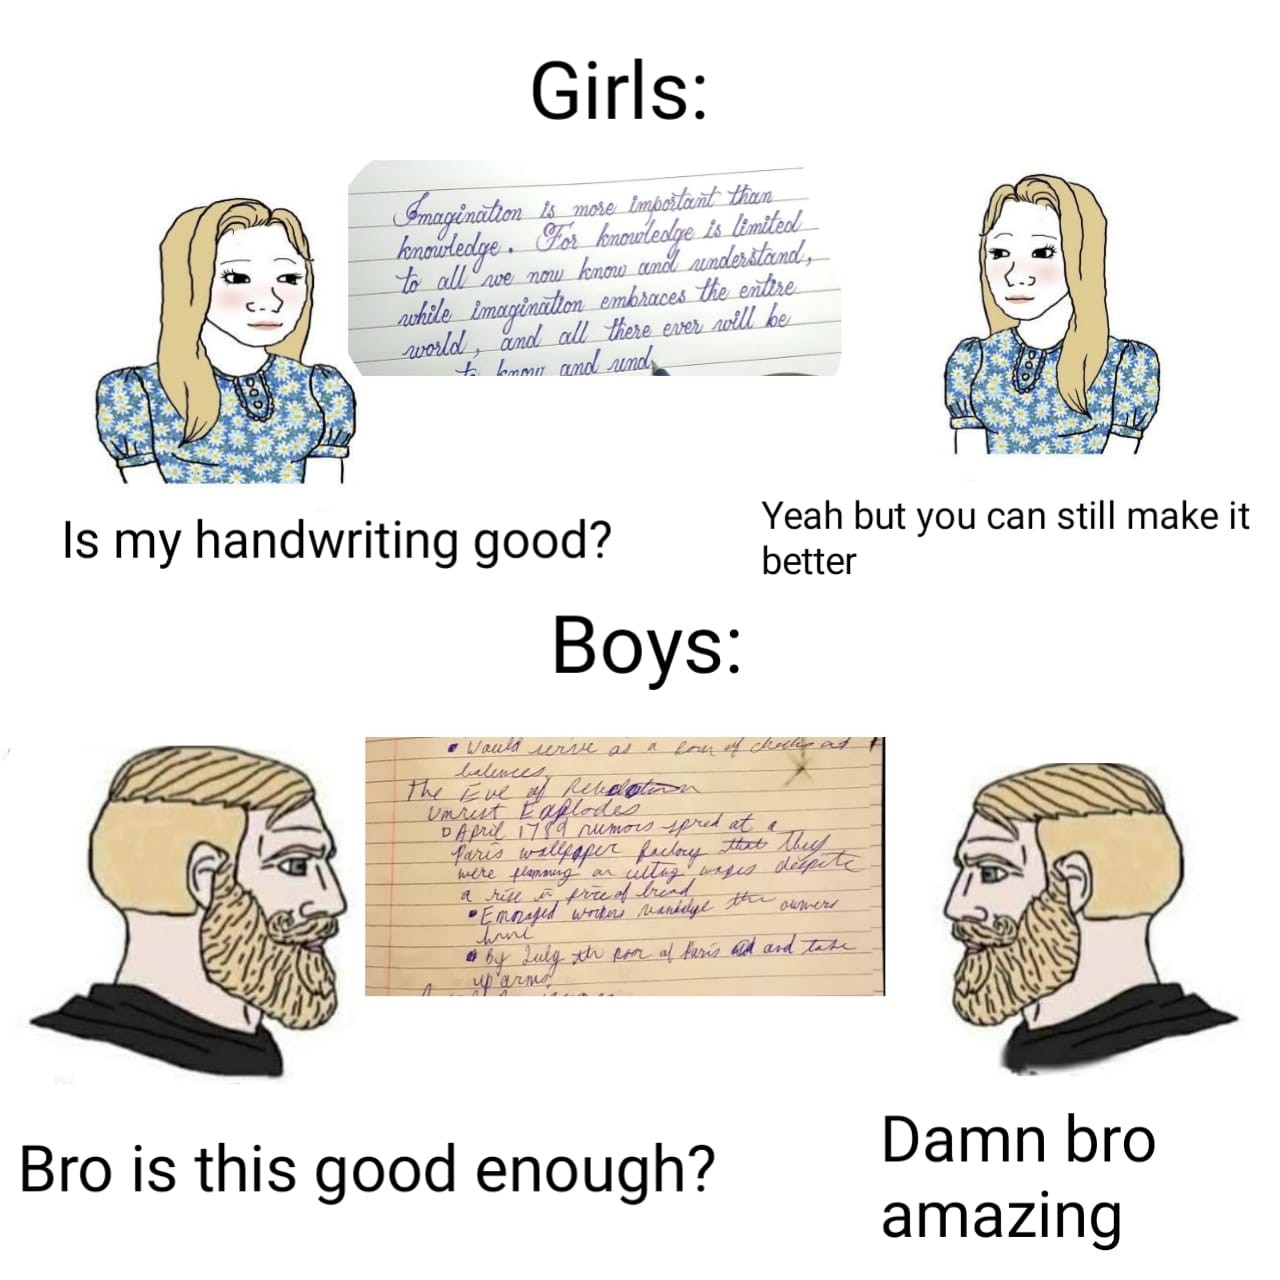 Dank, English, Boys Dank Memes Dank, English, Boys text: Girls: Is my handwriting good? Yeah but you can still make it better Boys: Bro is this good enough? Damn bro amazing 